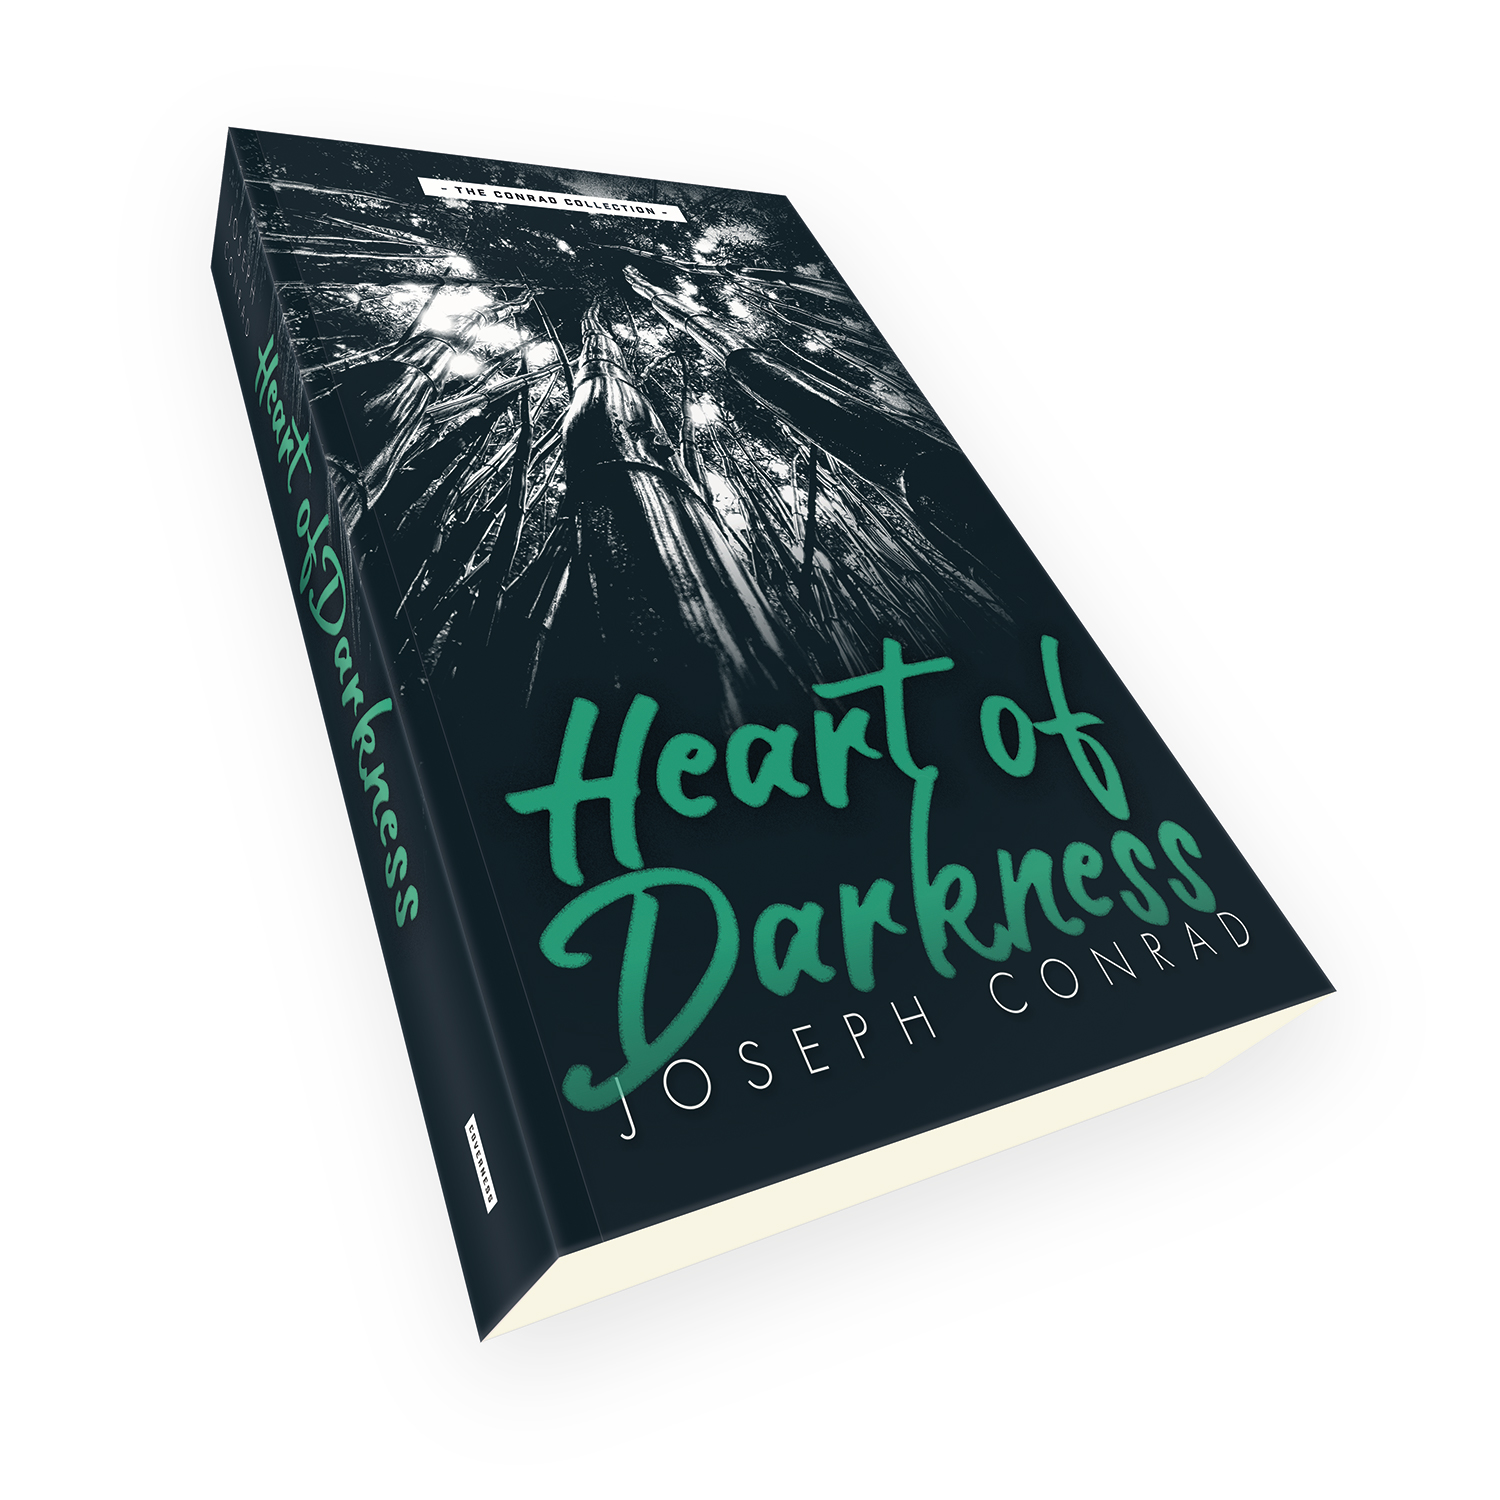 'Heart of Darkness' is a bespoke cover design for the classic novel by Joseph Conrad. The book cover was designed by Mark Thomas, of coverness.com. To find out more about my book design services, please visit www.coverness.com.